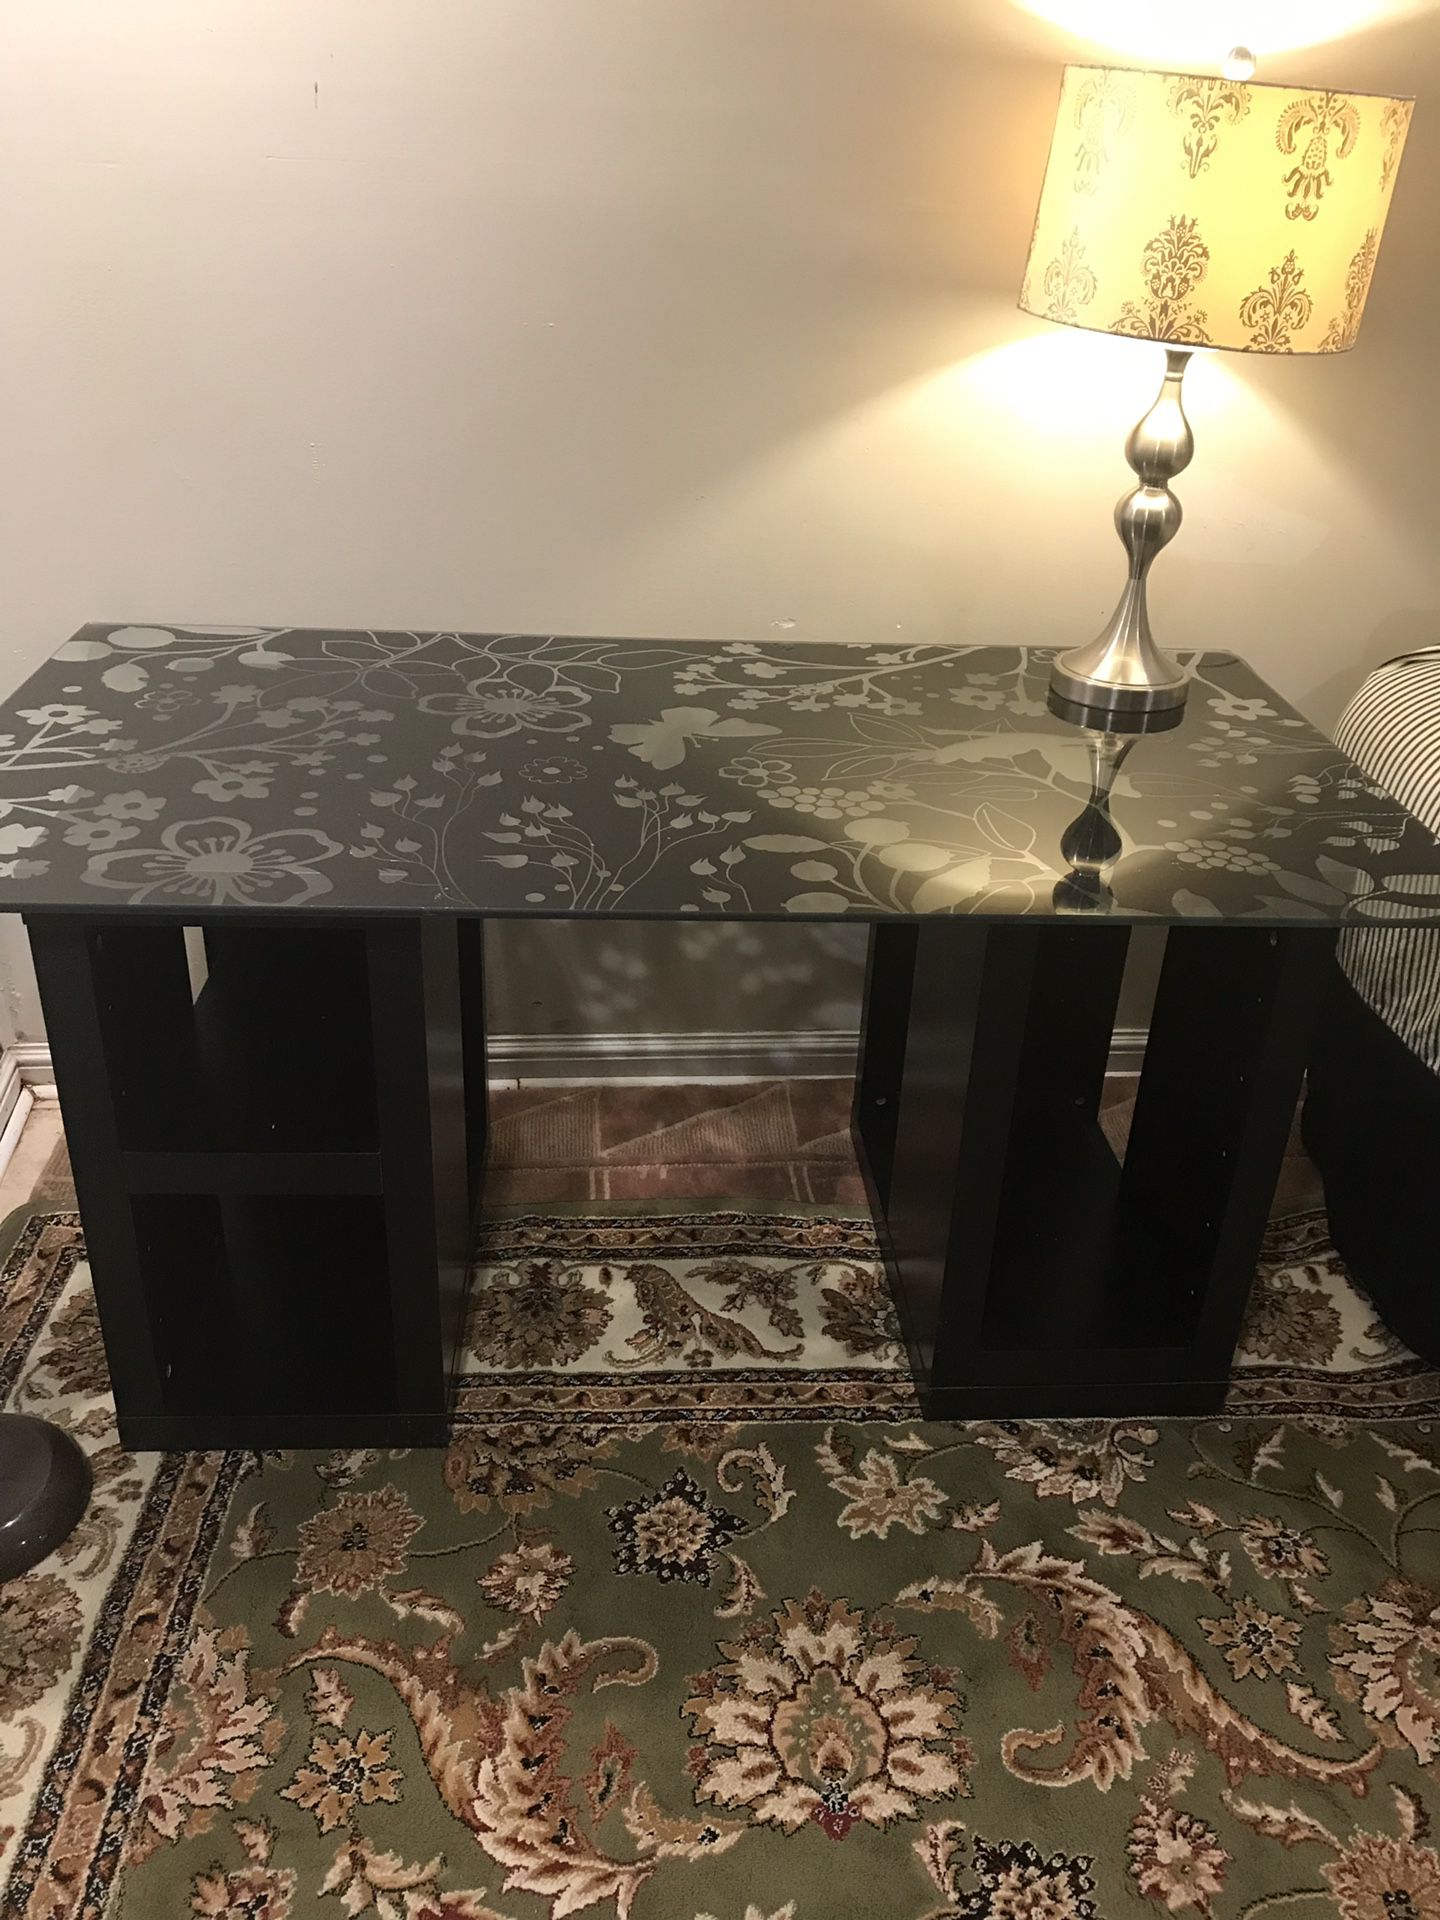 Decorative office desk ( great addition in the house)